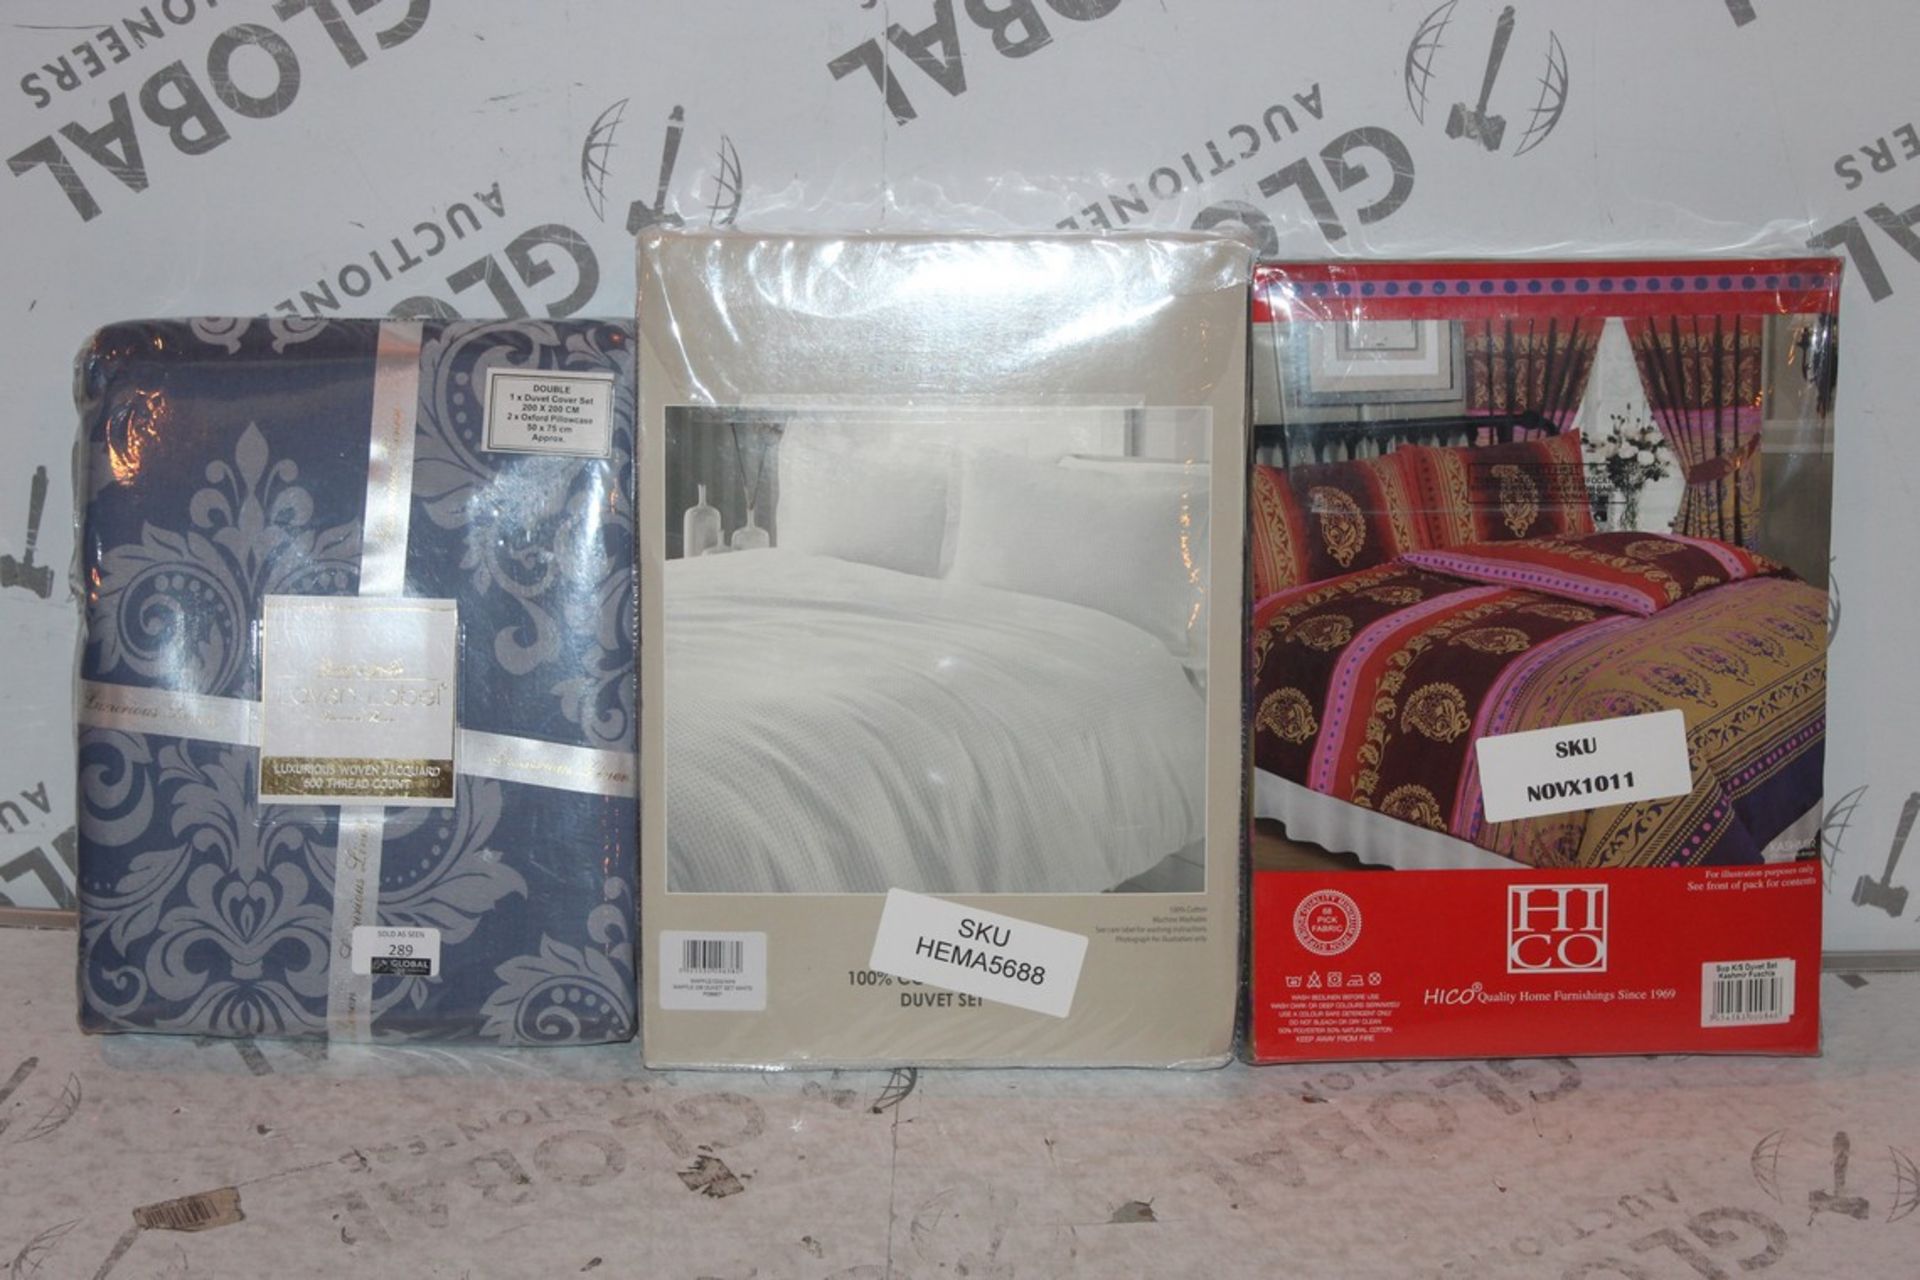 Lot to Contain 3 Assorted Bedding Items to Include Lavish Label Duvet Cover Sets, Super King-size